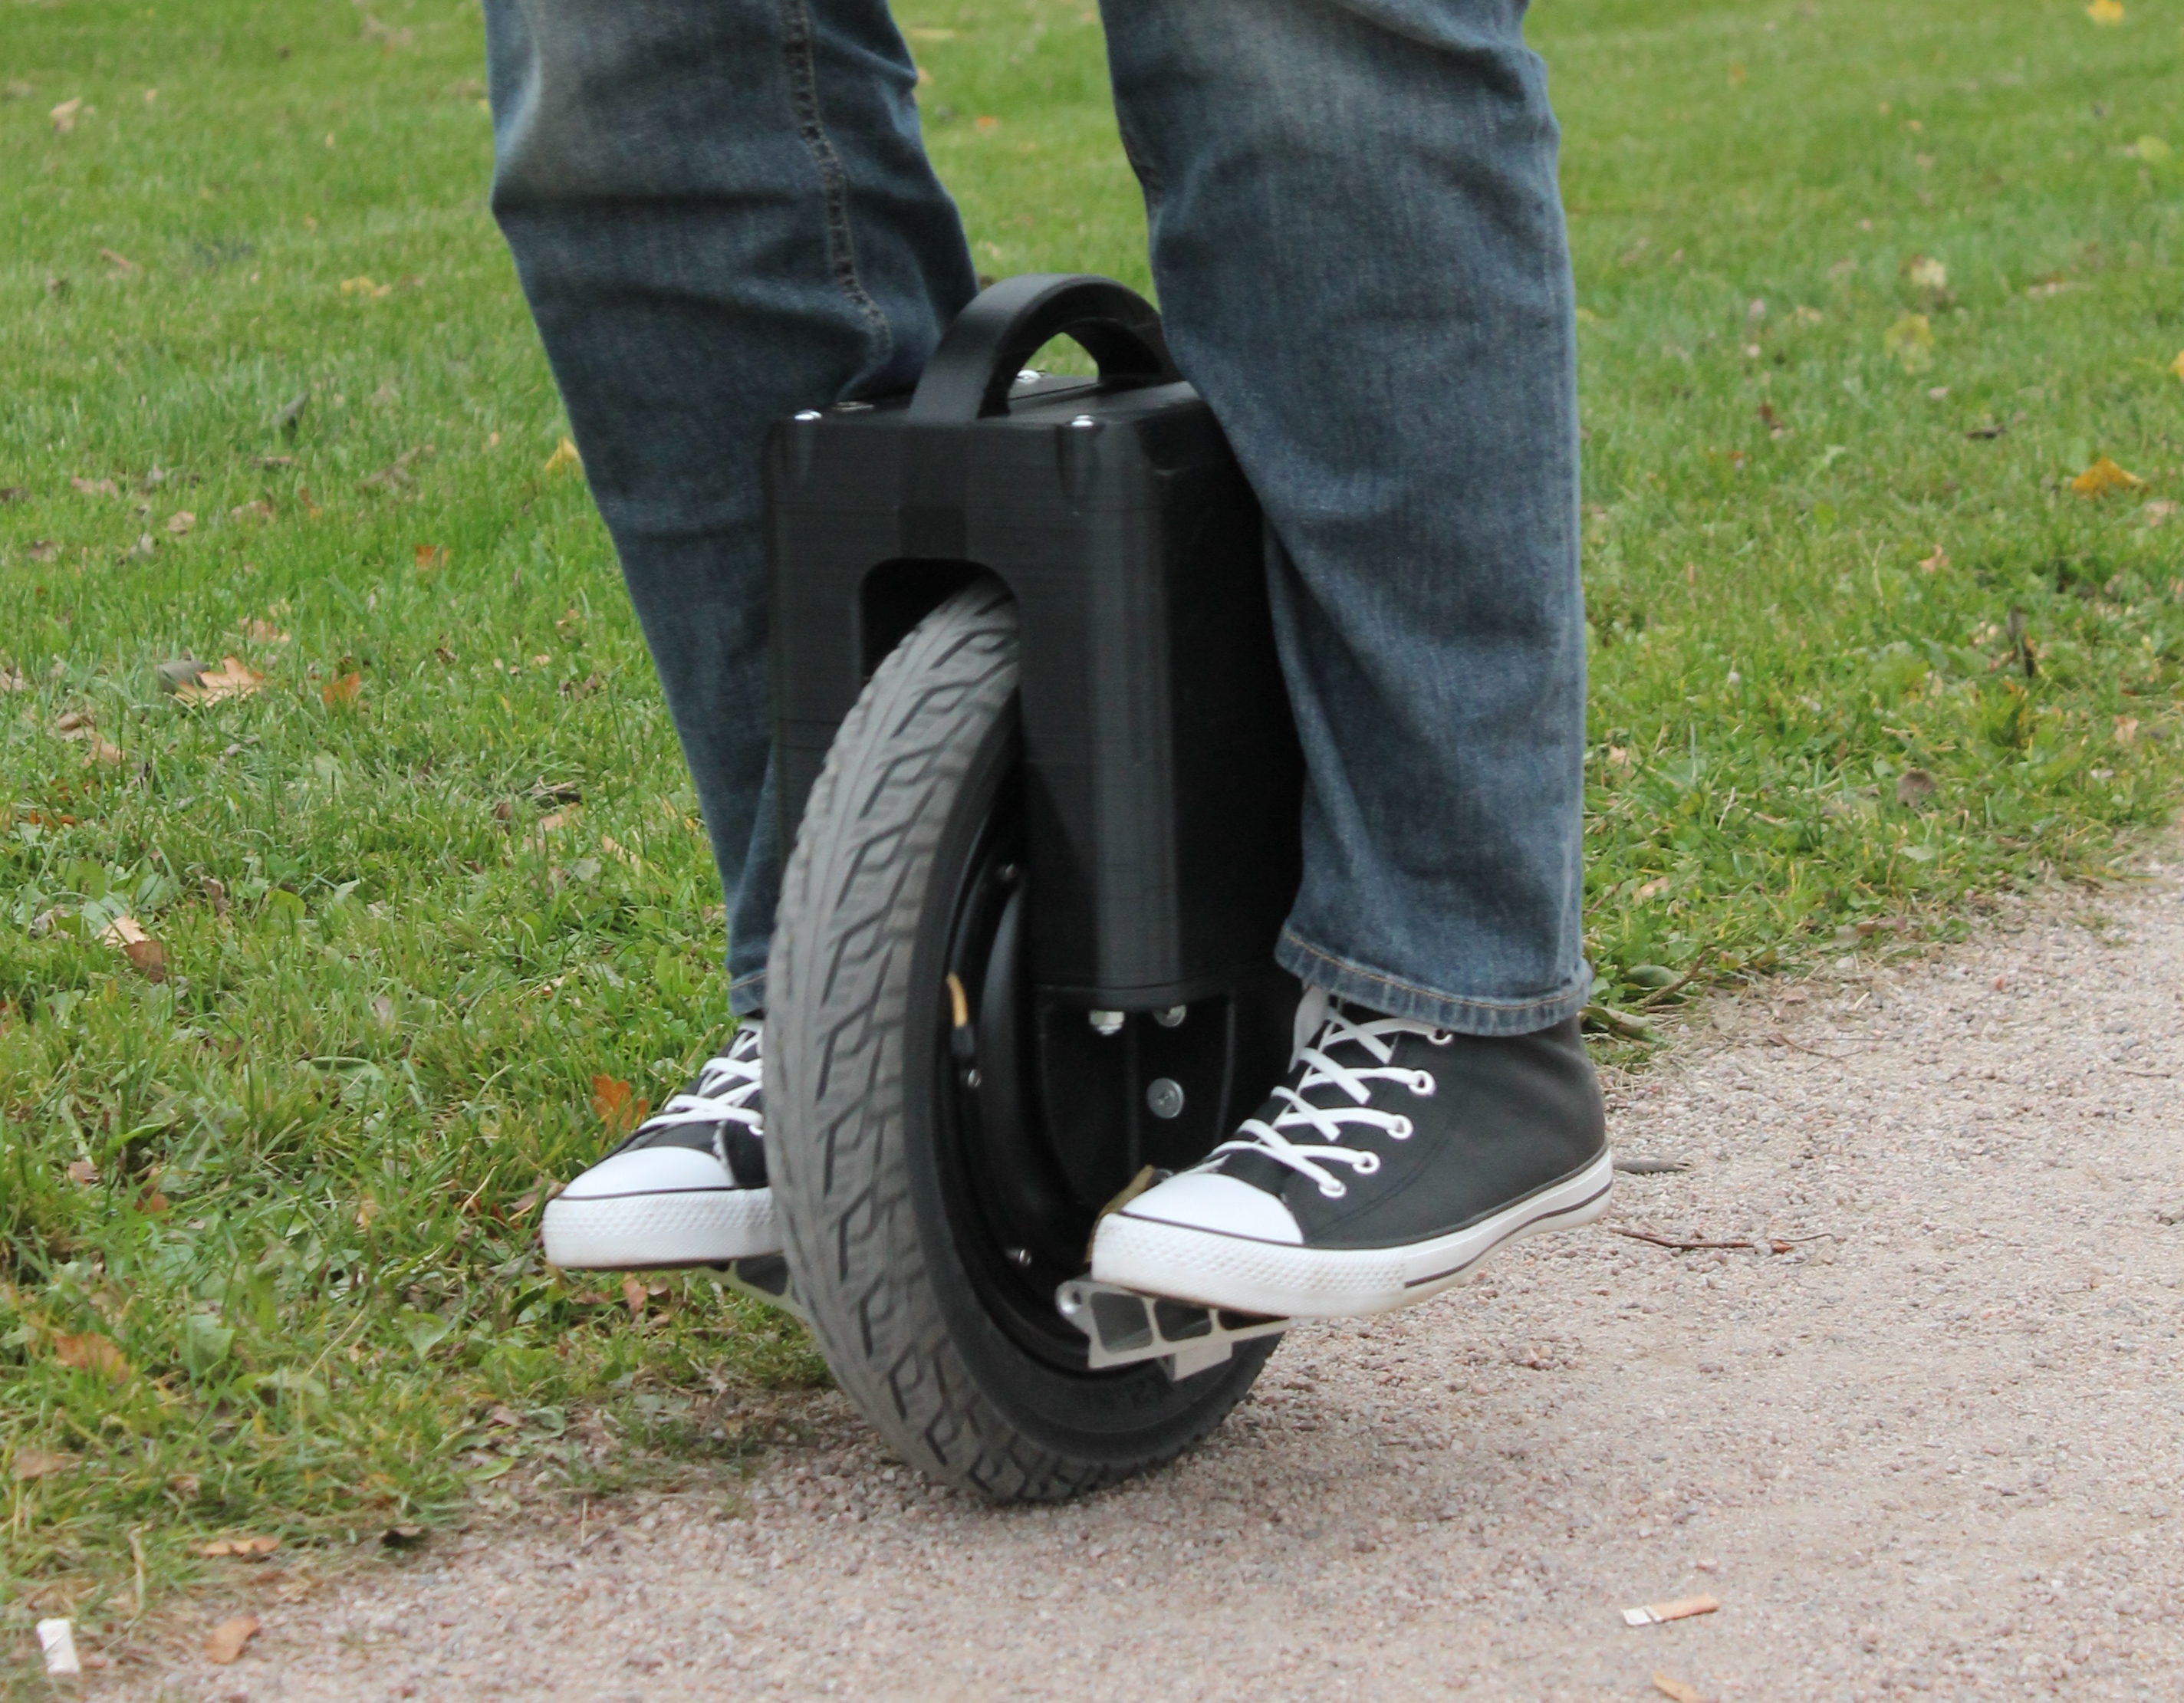 3D Print a High-Power Electric Unicycle